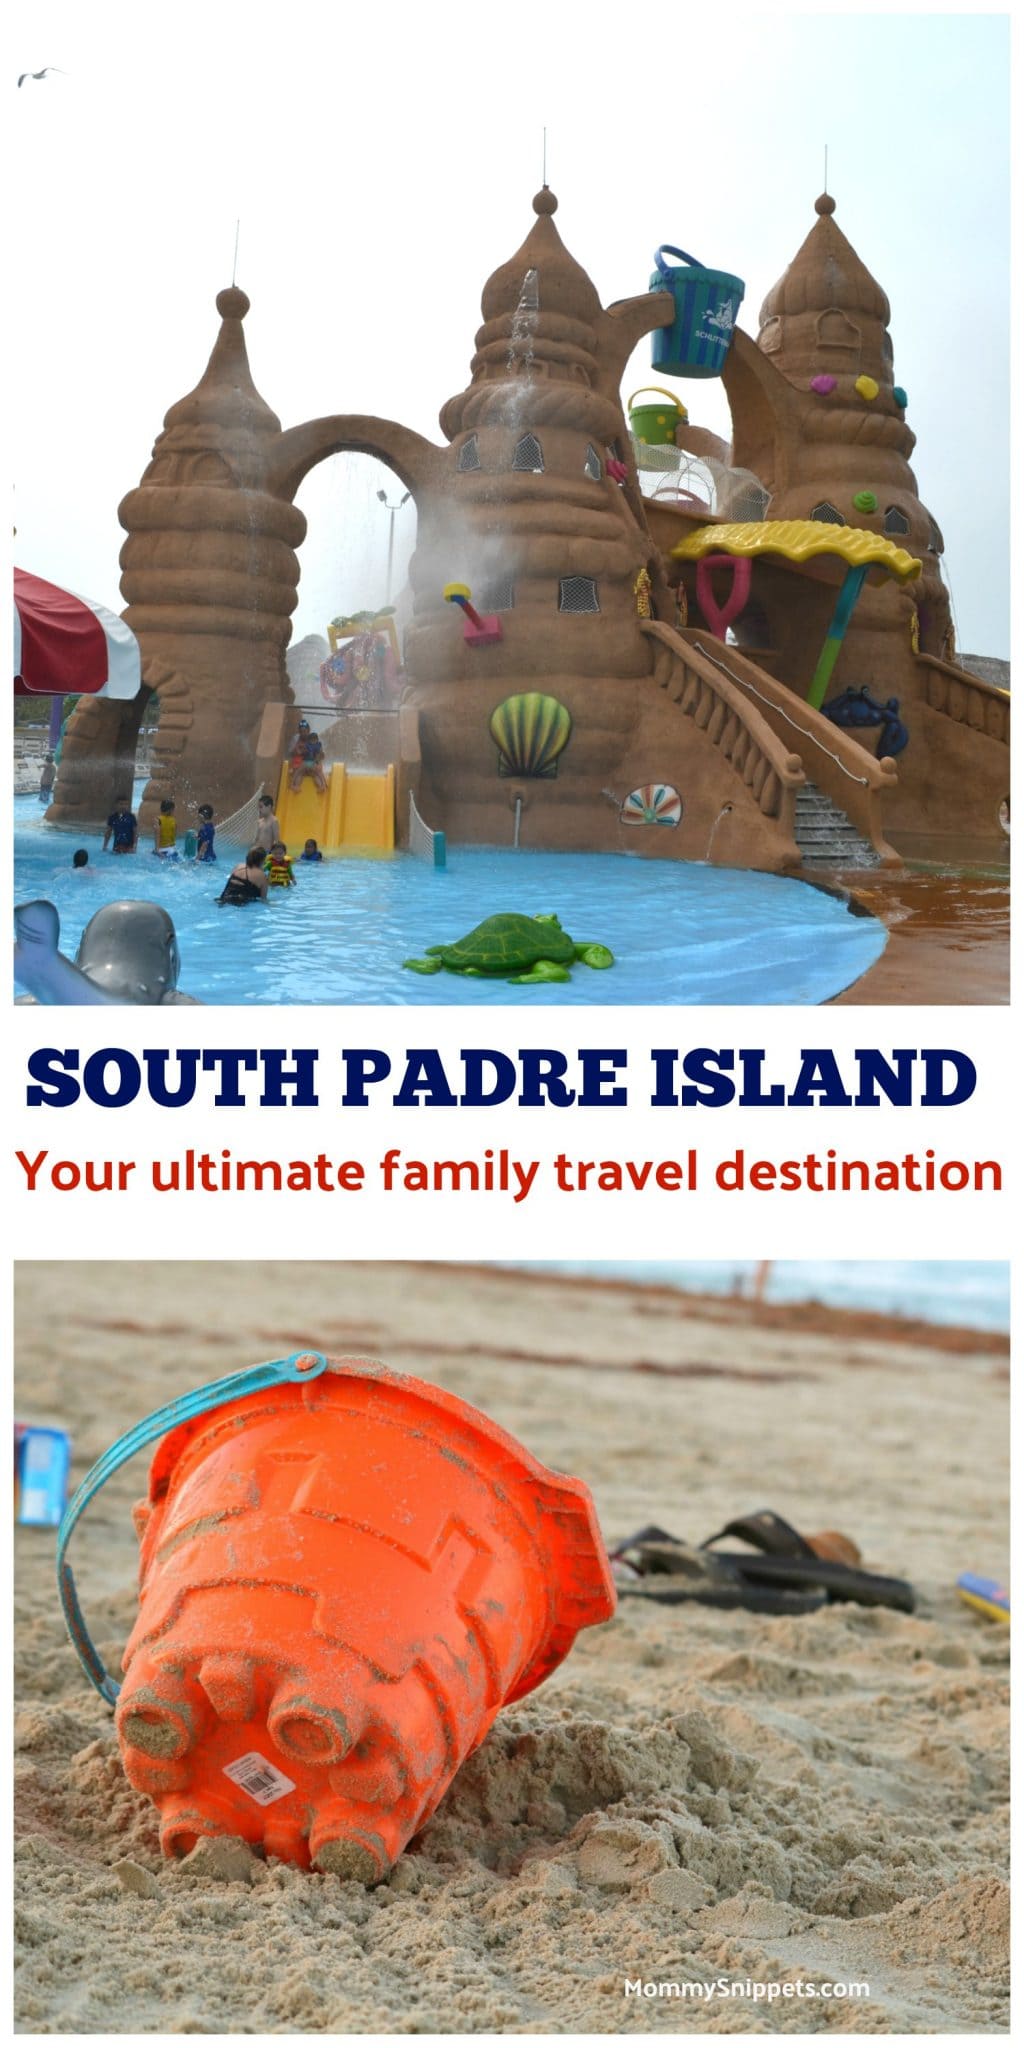 What makes South Padre Island a fantastic family destination- Looking for things to do with the family in South Padre Island? These South Padre Island attractions are not to be missed!